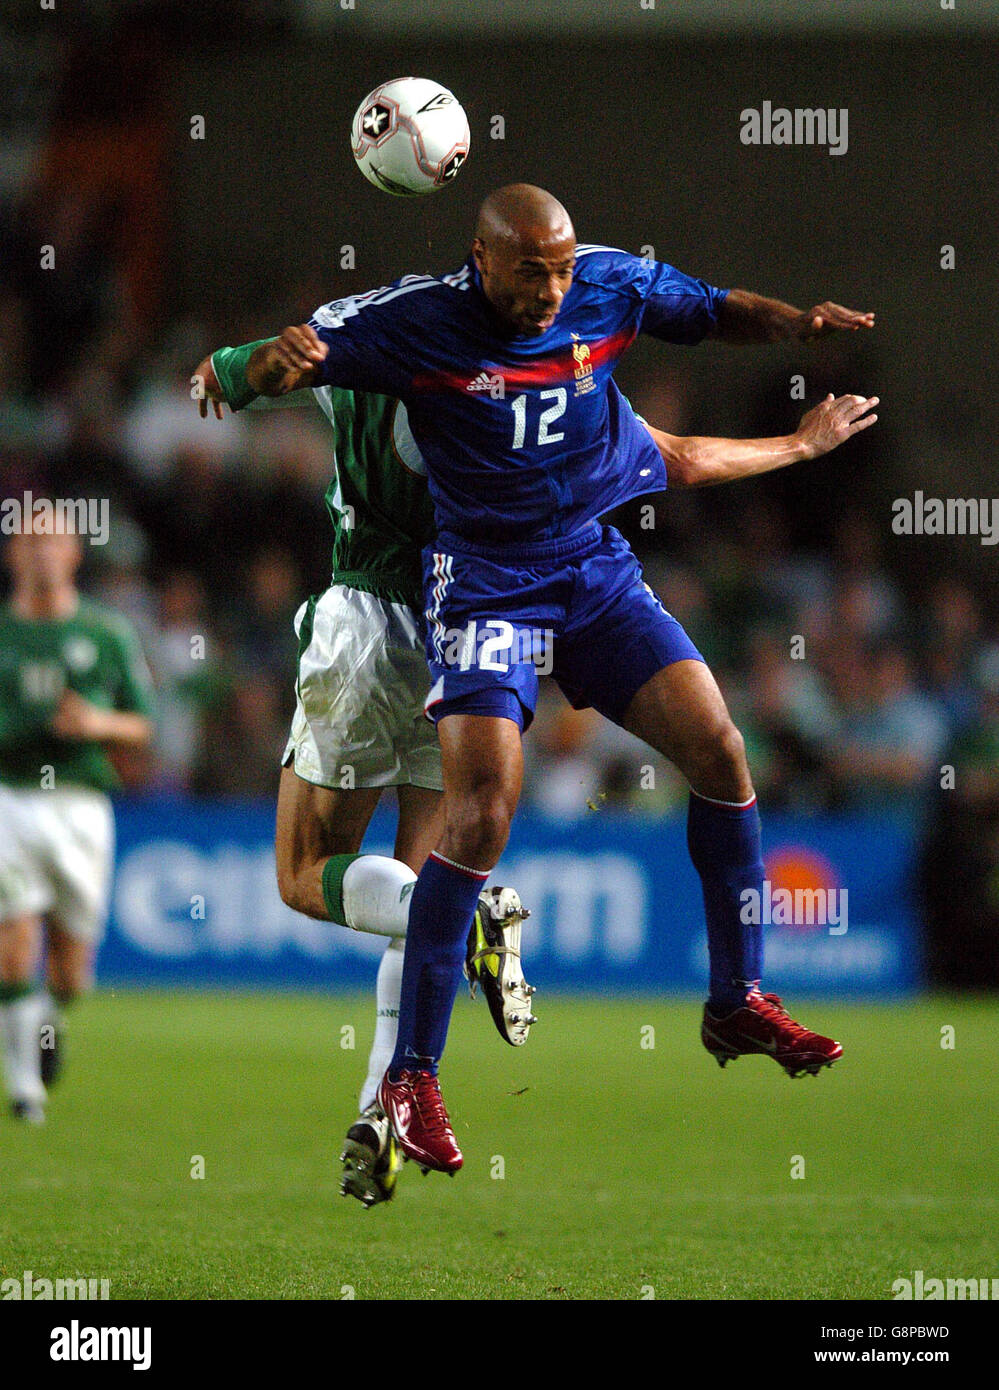 France's Thierry Henry clashes with Ireland's Roy Keane Stock Photo